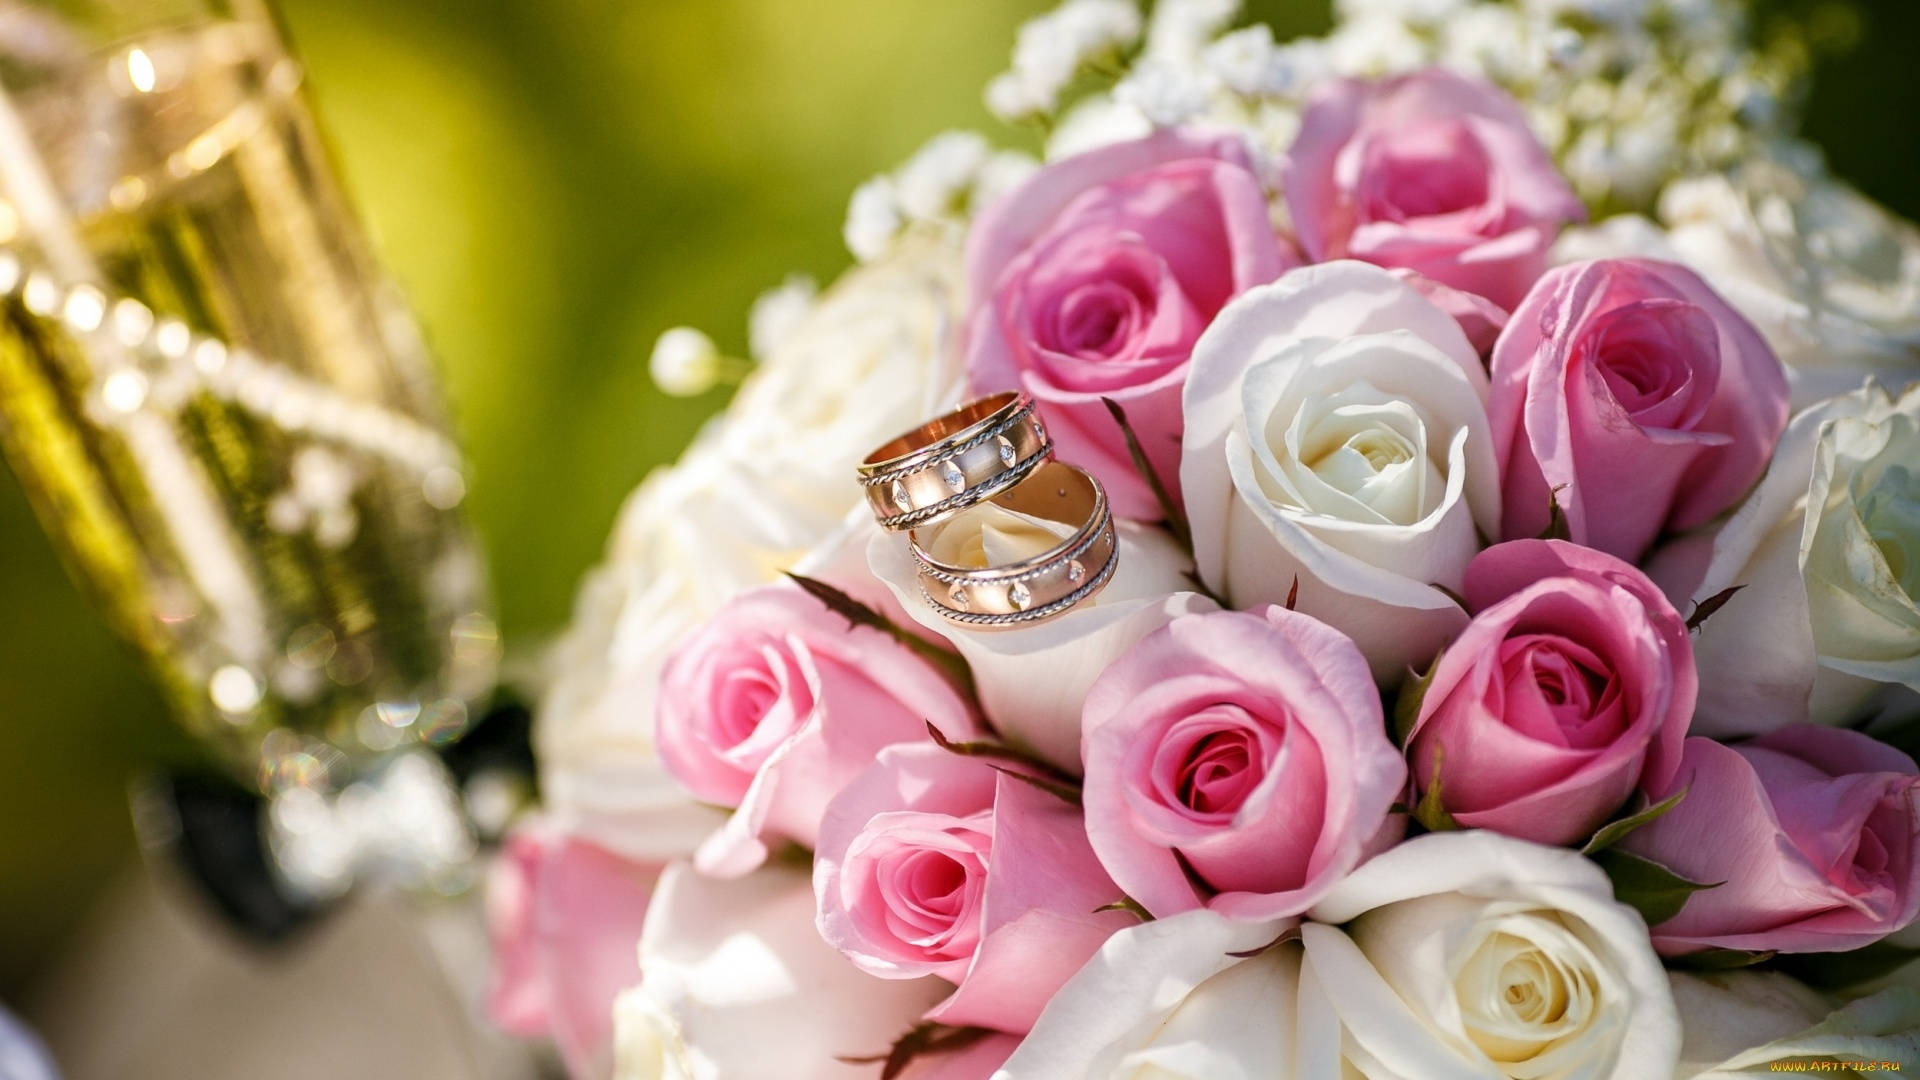 Romantic Wedding Rings On A Beautiful Bouquet Background